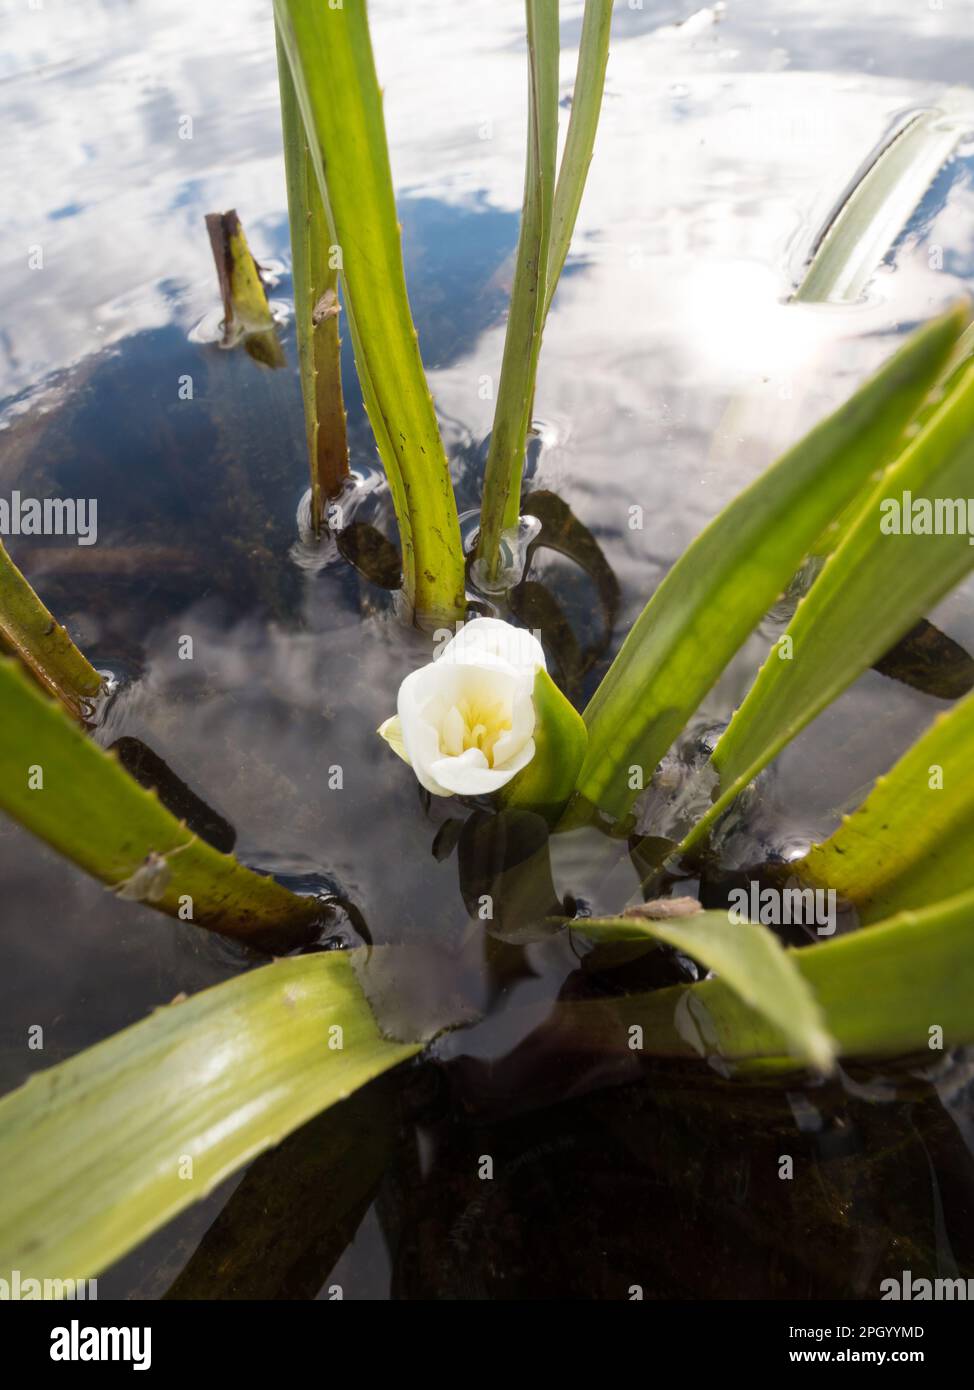 White flower of water soldier aquatic plant Stock Photo